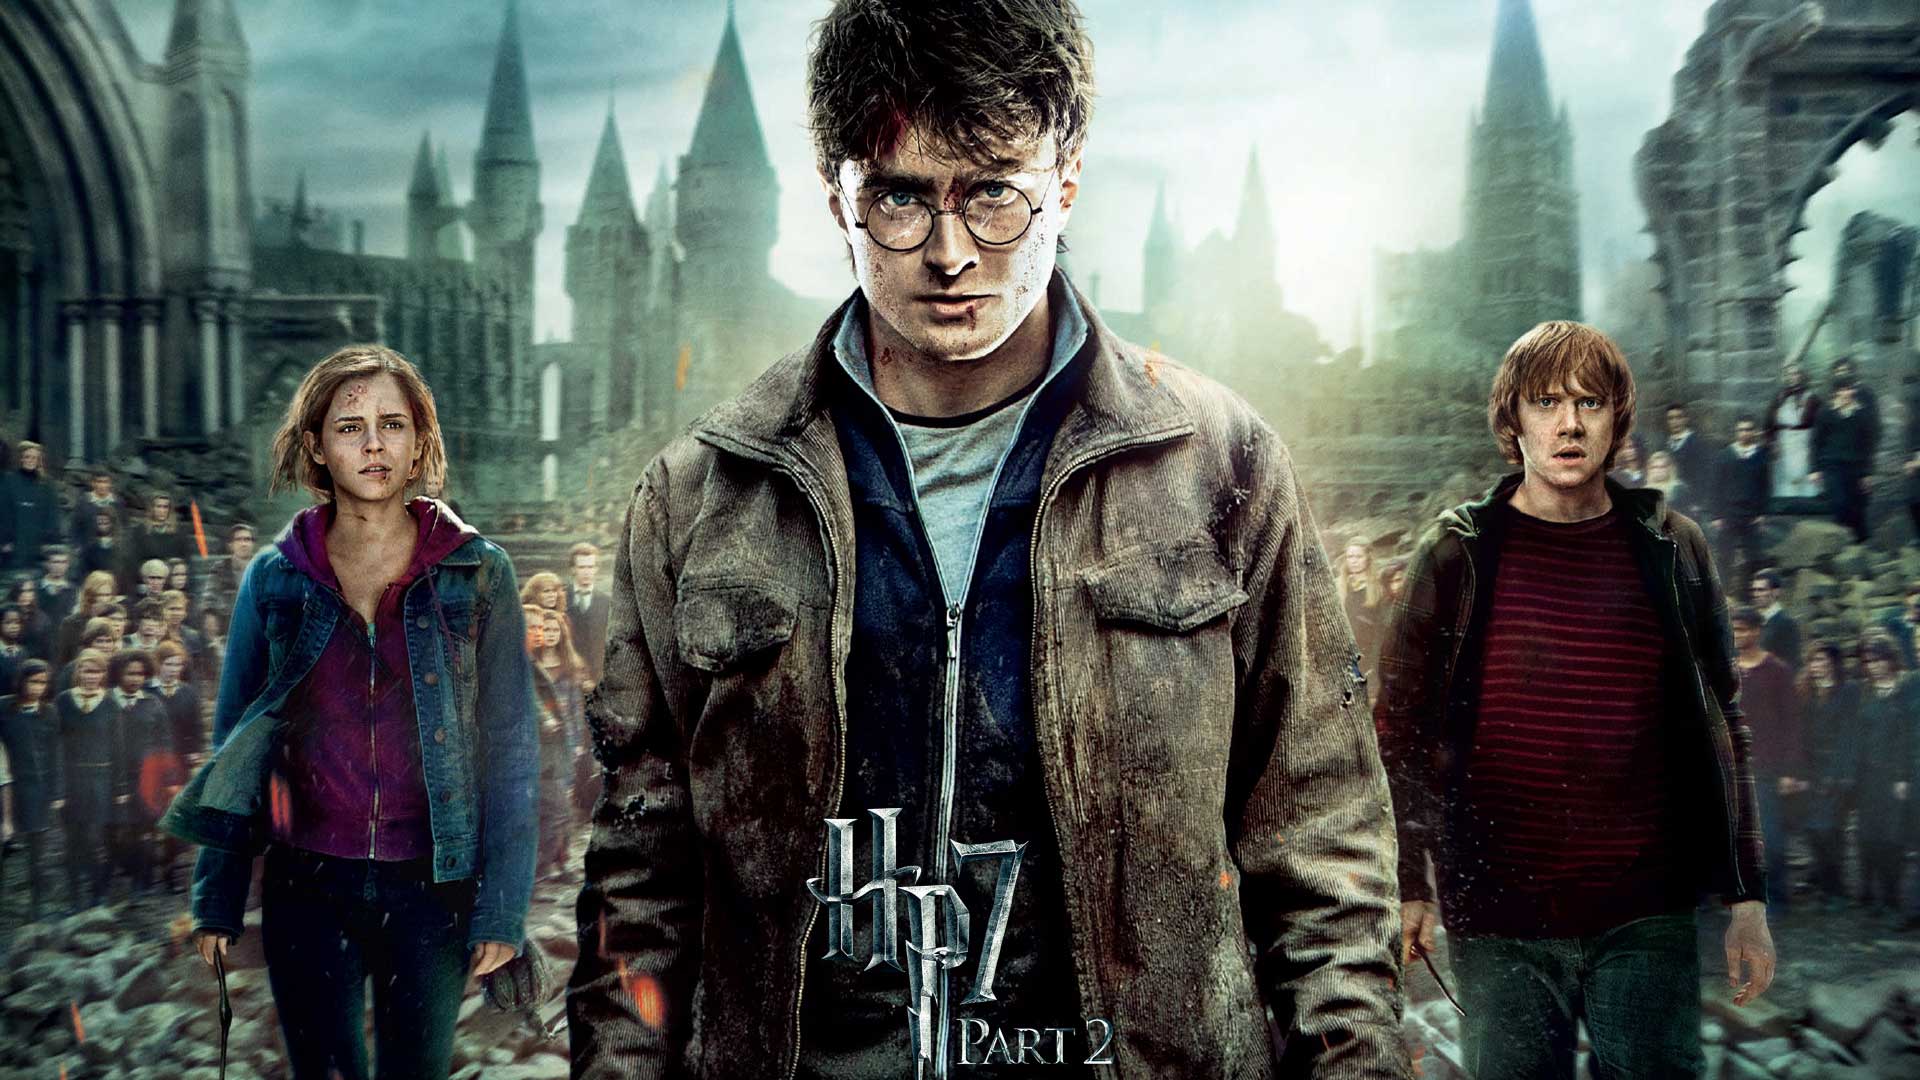 Harry Potter and the Deathly Hallows, Part 2 Review - GameSpot